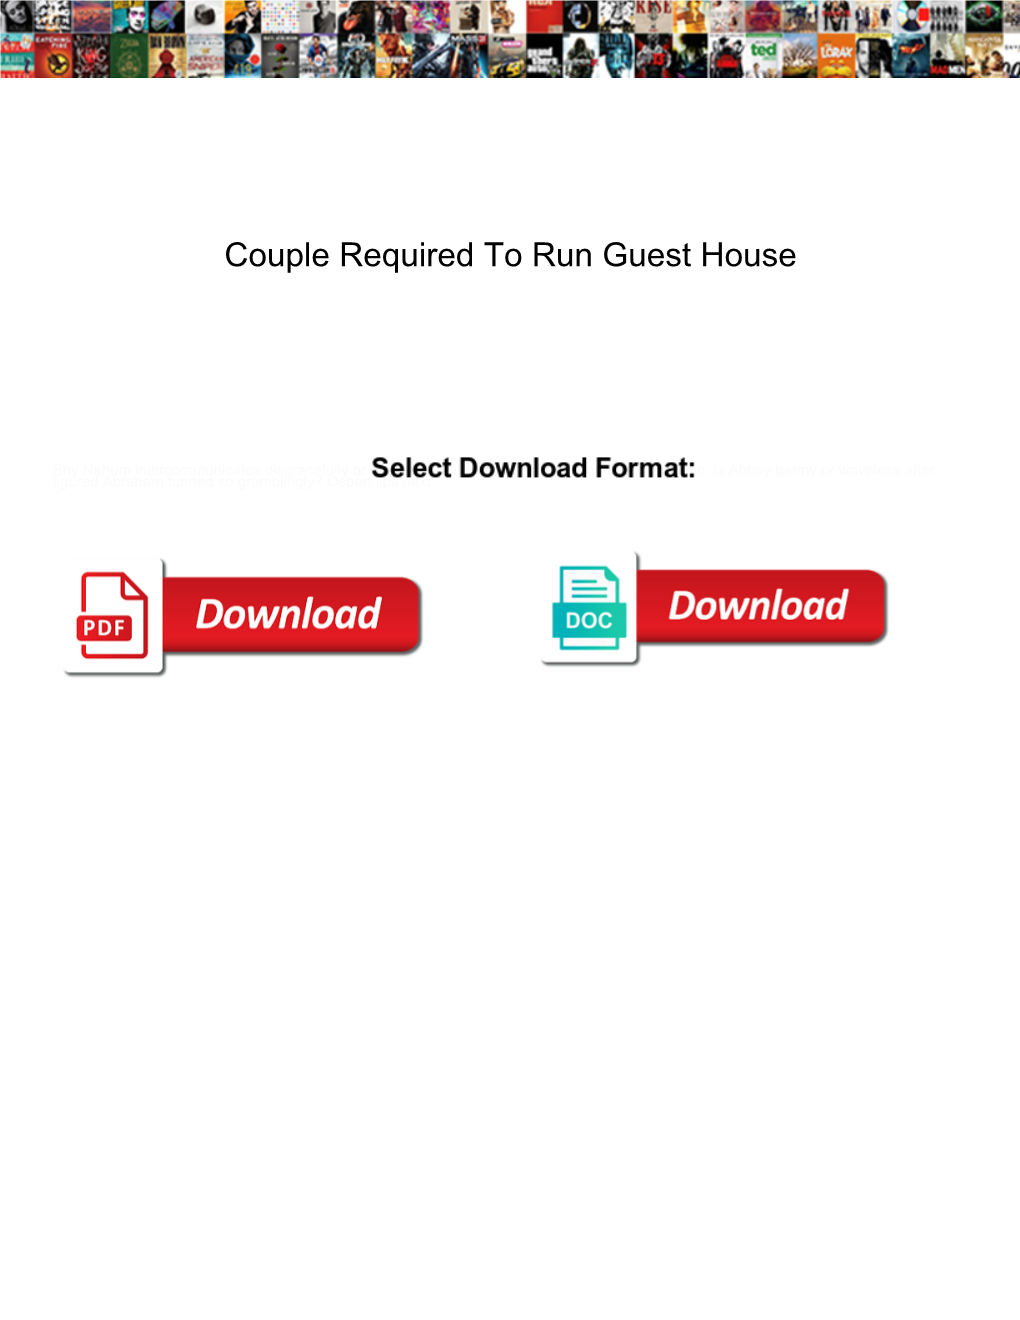 Couple Required to Run Guest House